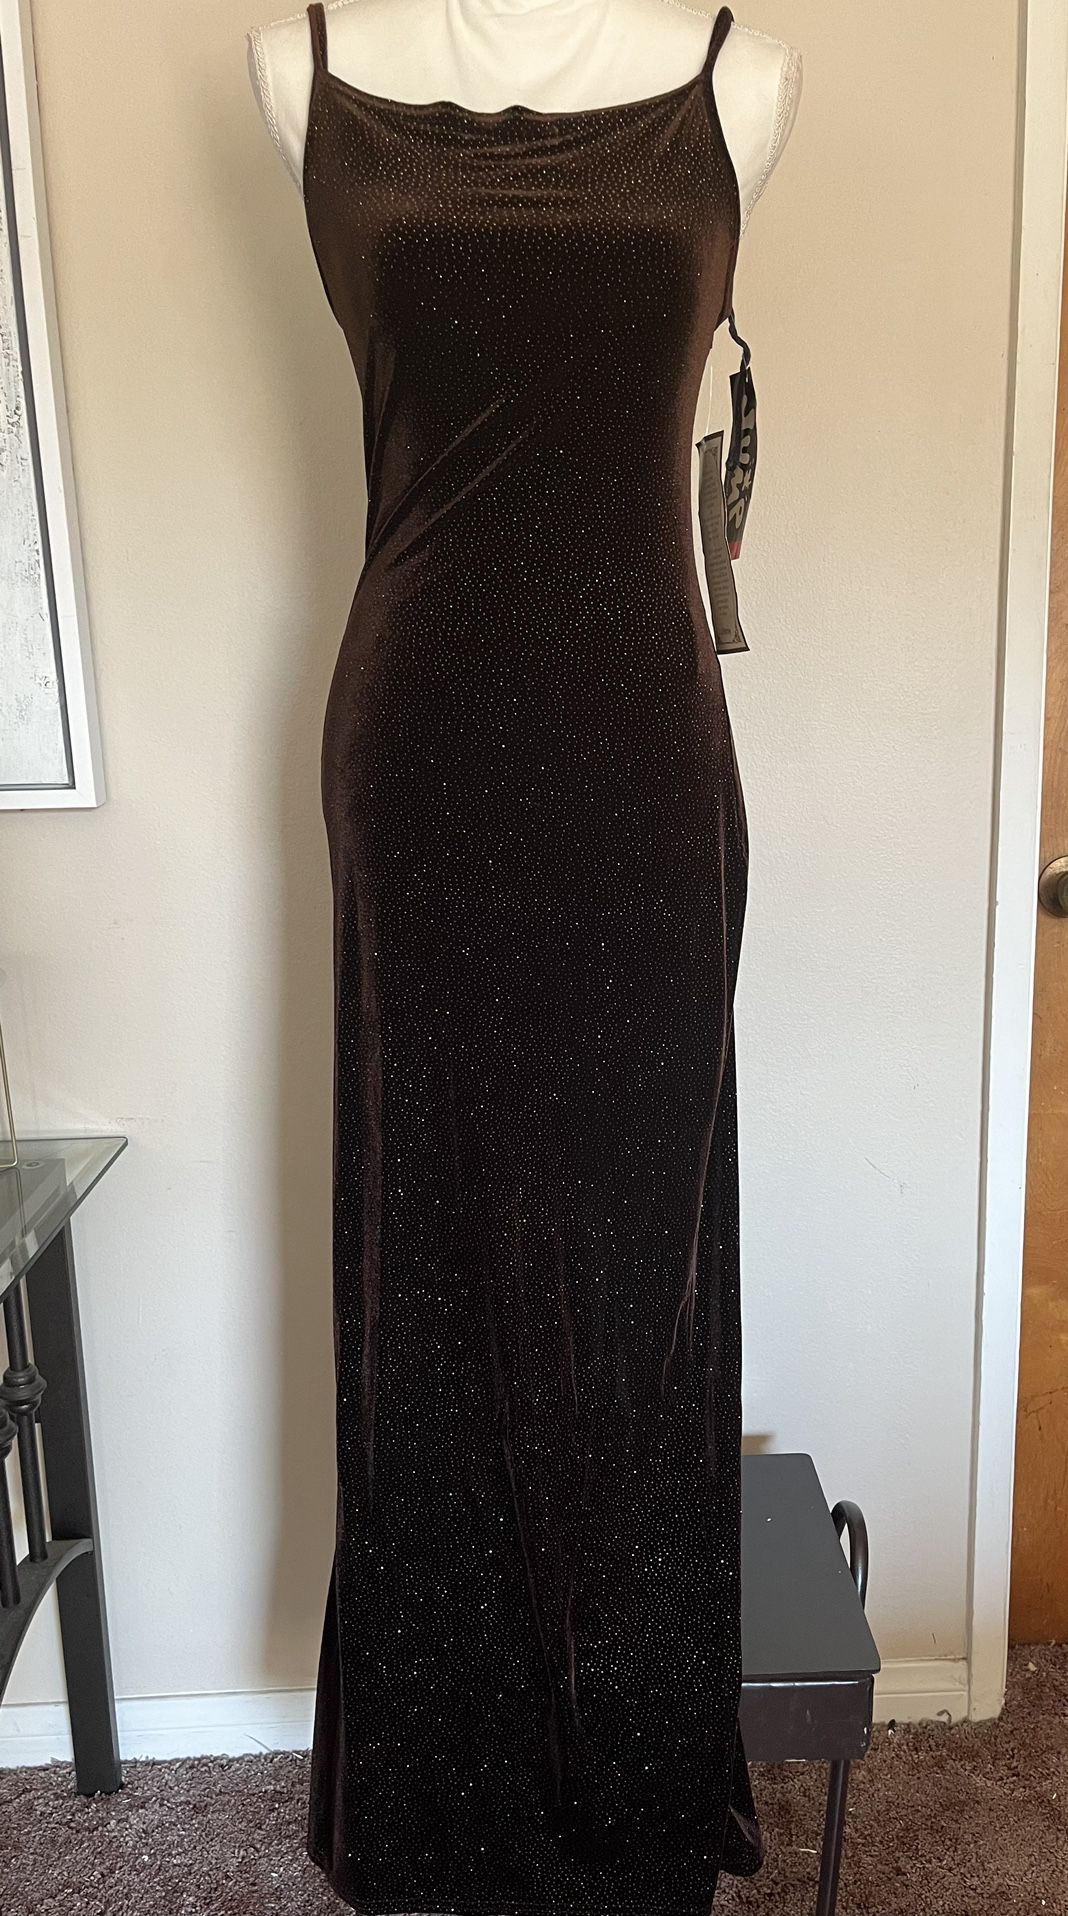 Pretty Fitted Brown with Gold Sparkles Long Dress Size 7/8 NWT